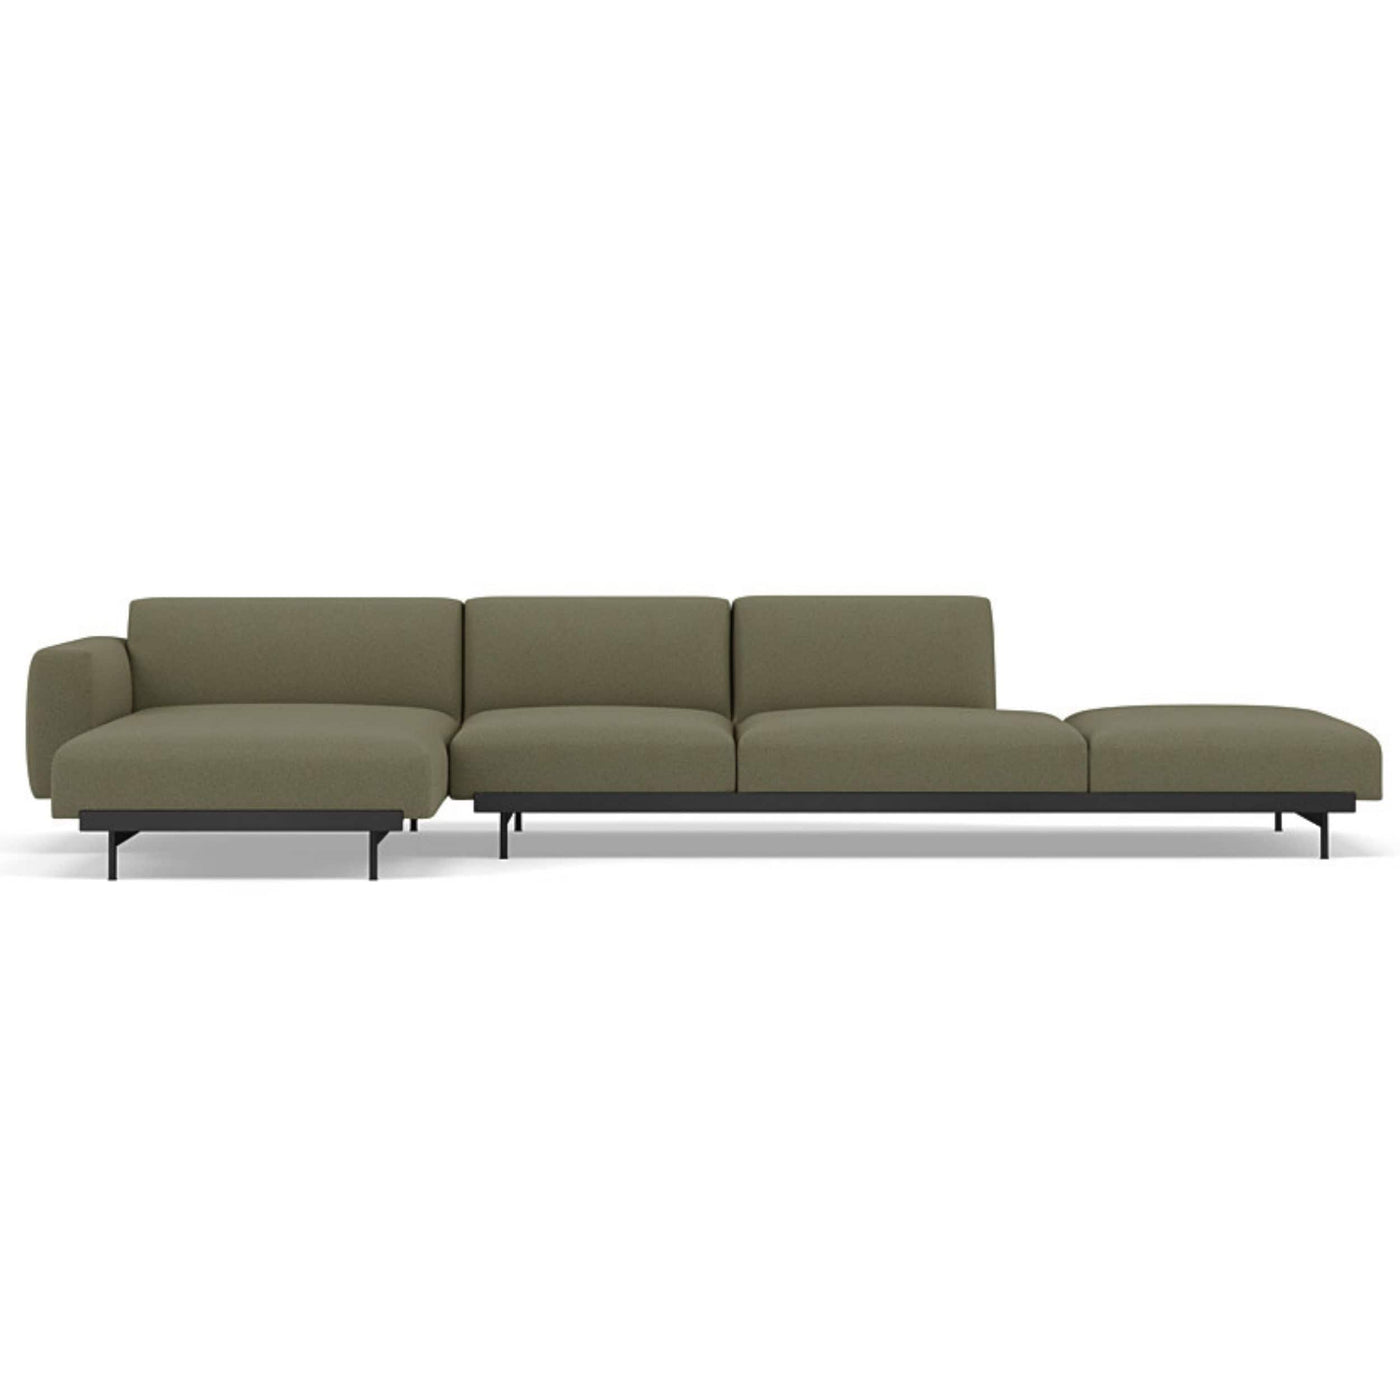 Muuto In Situ Modular 4 Seater Sofa configuration 5. Made to order from someday designs. #colour_clay-17